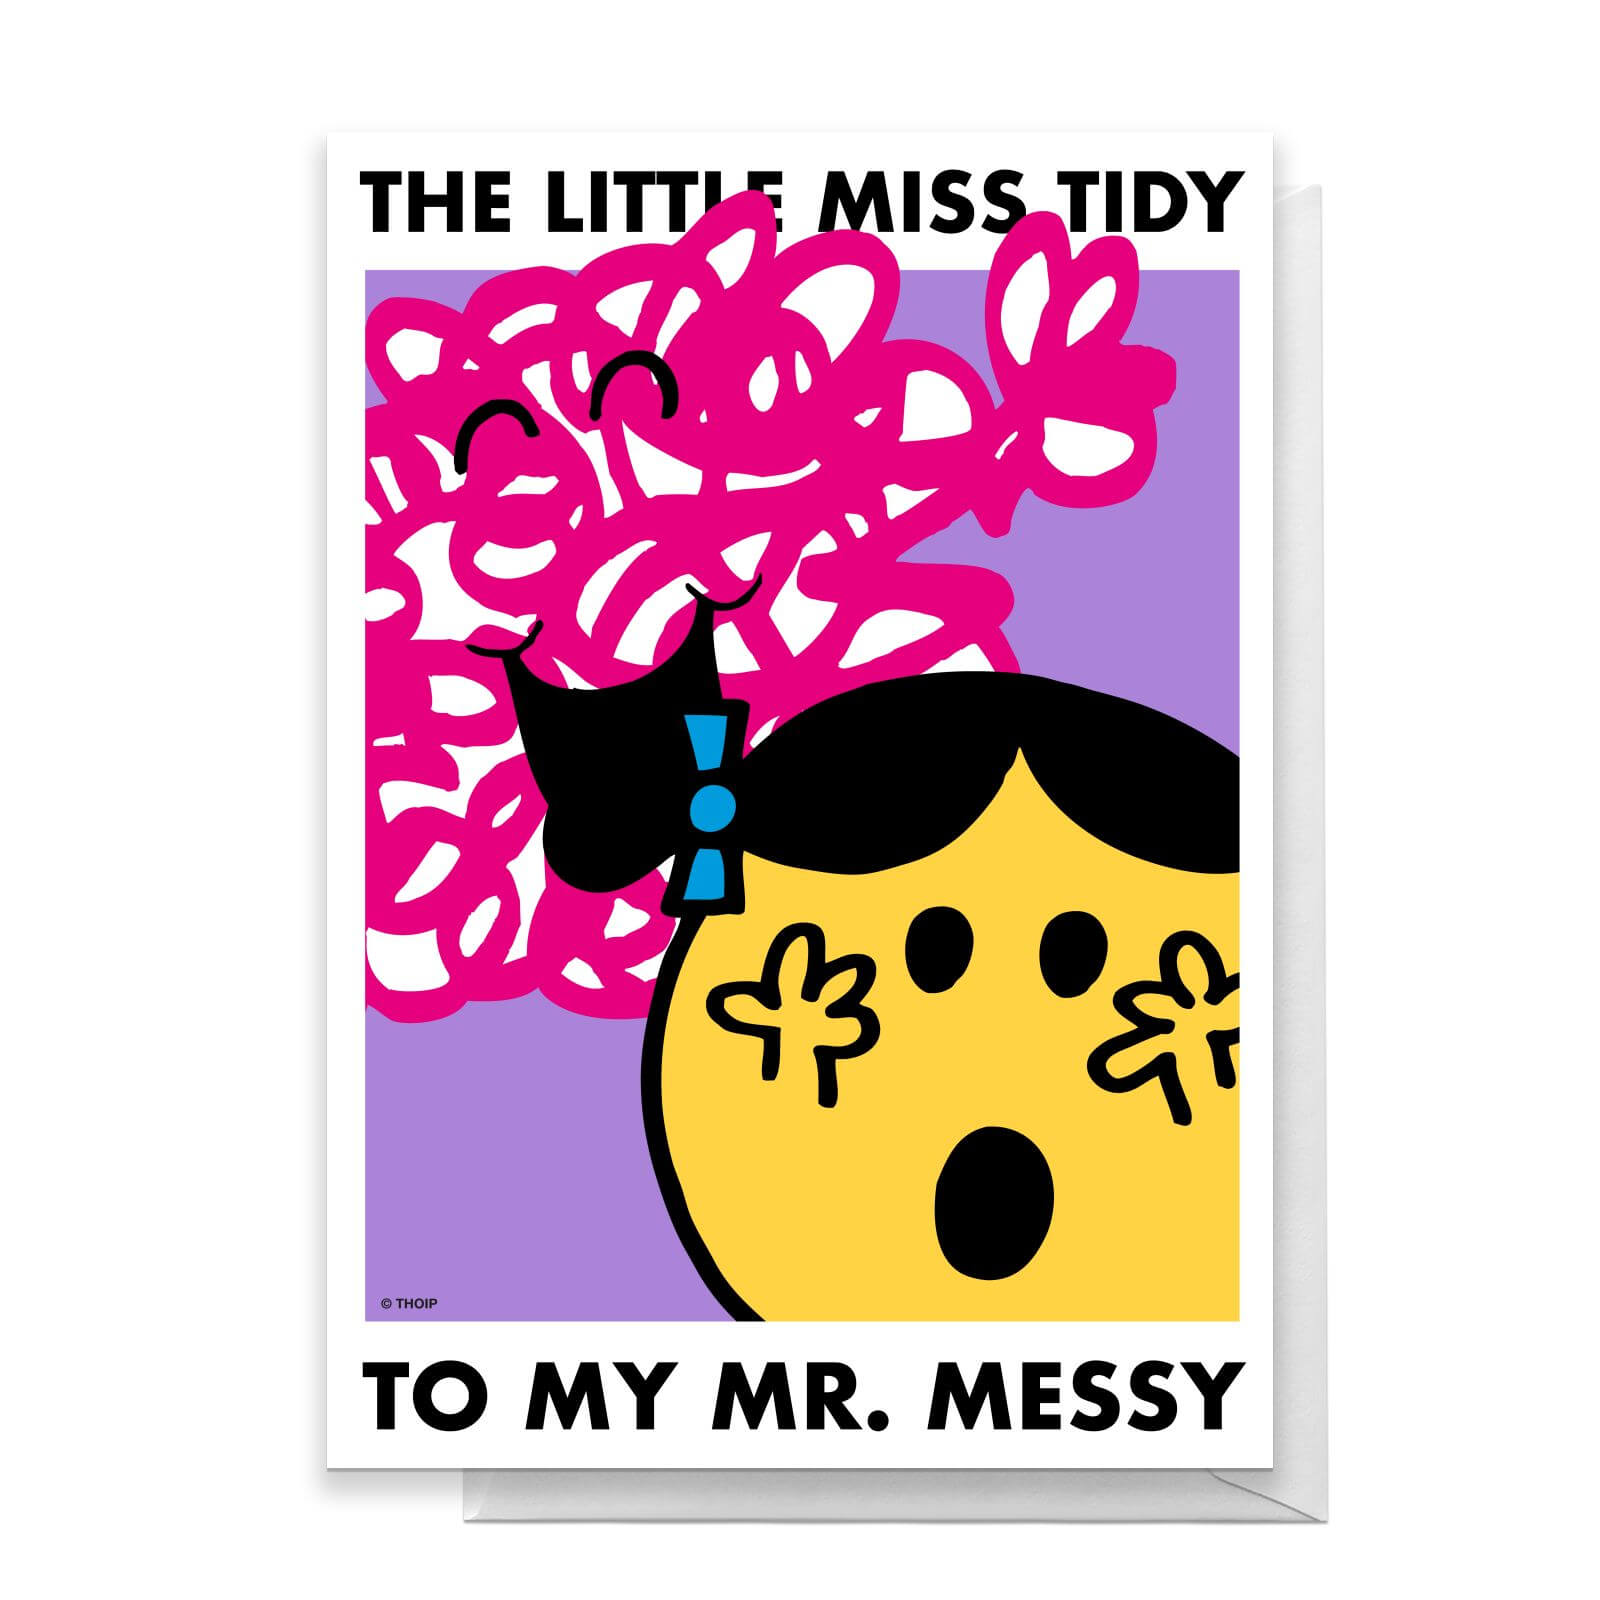 Mr Men & Little Miss The Little Miss Tidy To My Mr. Messy Greetings Card - Standard Card